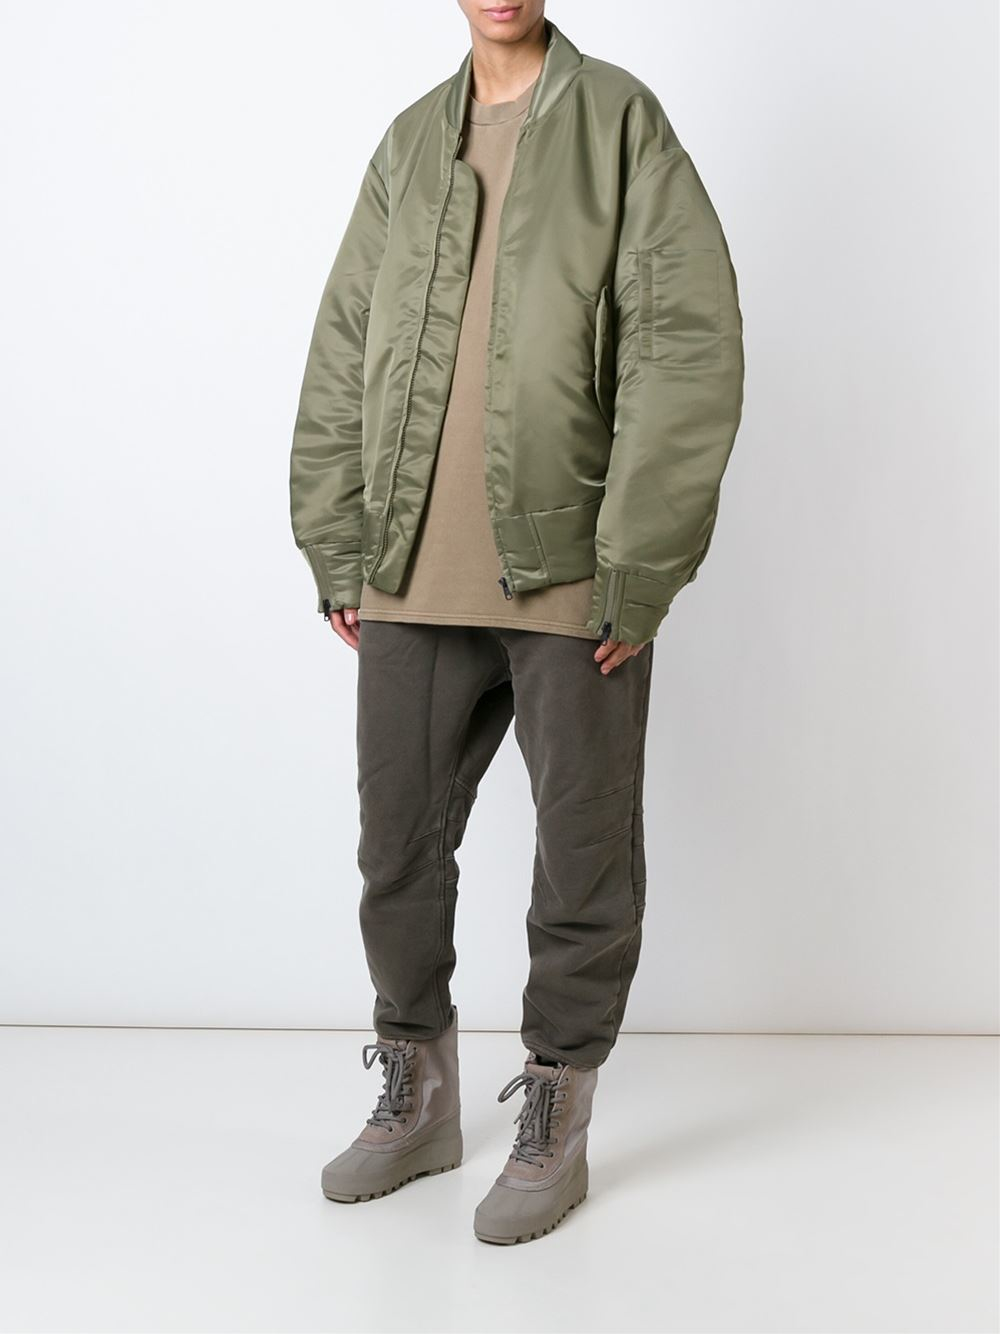 Lyst - Yeezy Adidas Originals By Kanye West Bomber Jacket in Natural ...